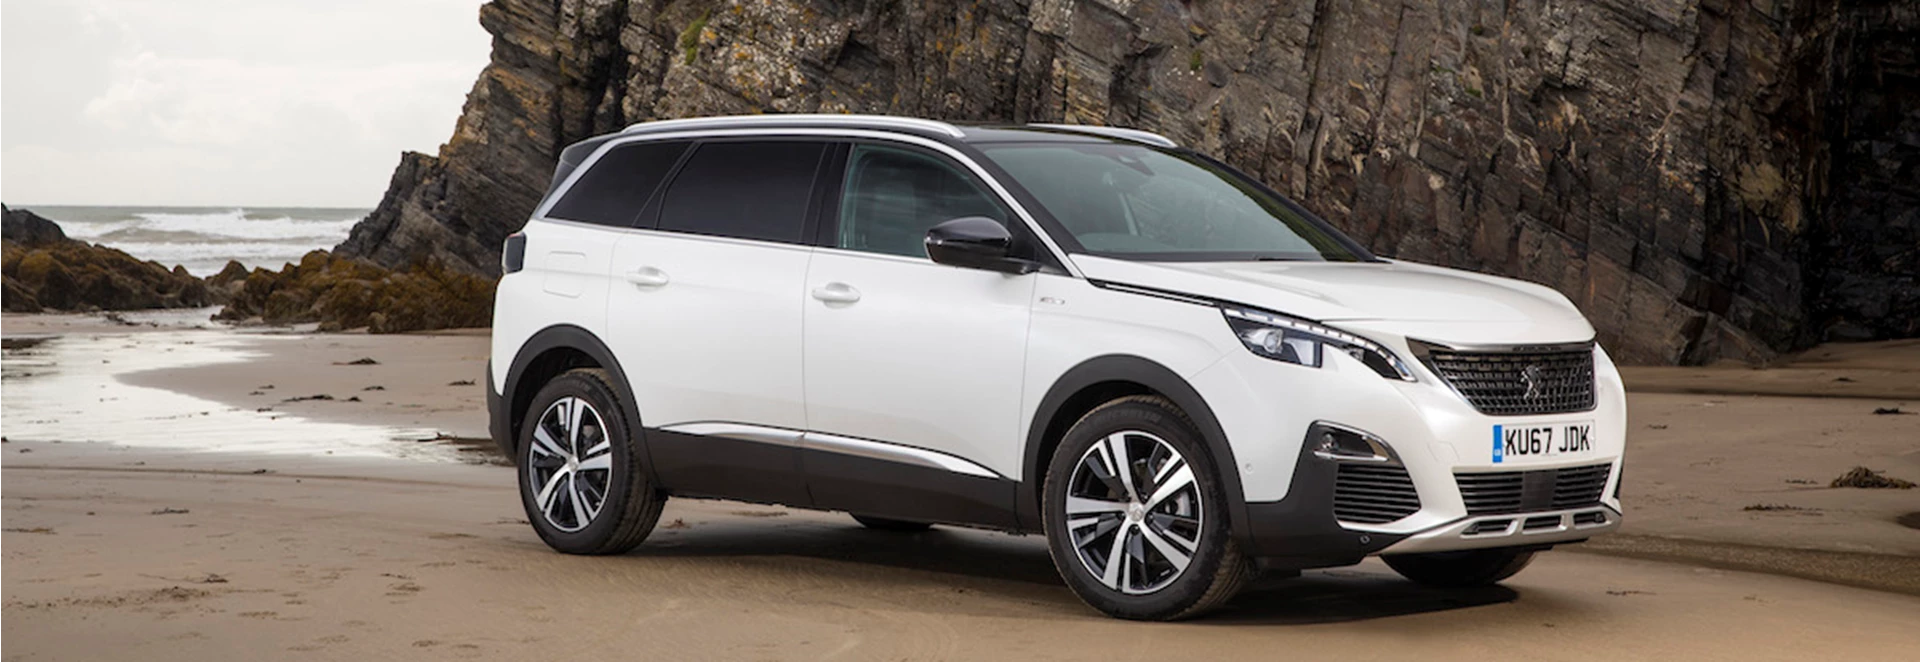 2017 Peugeot 5008 SUV Review 